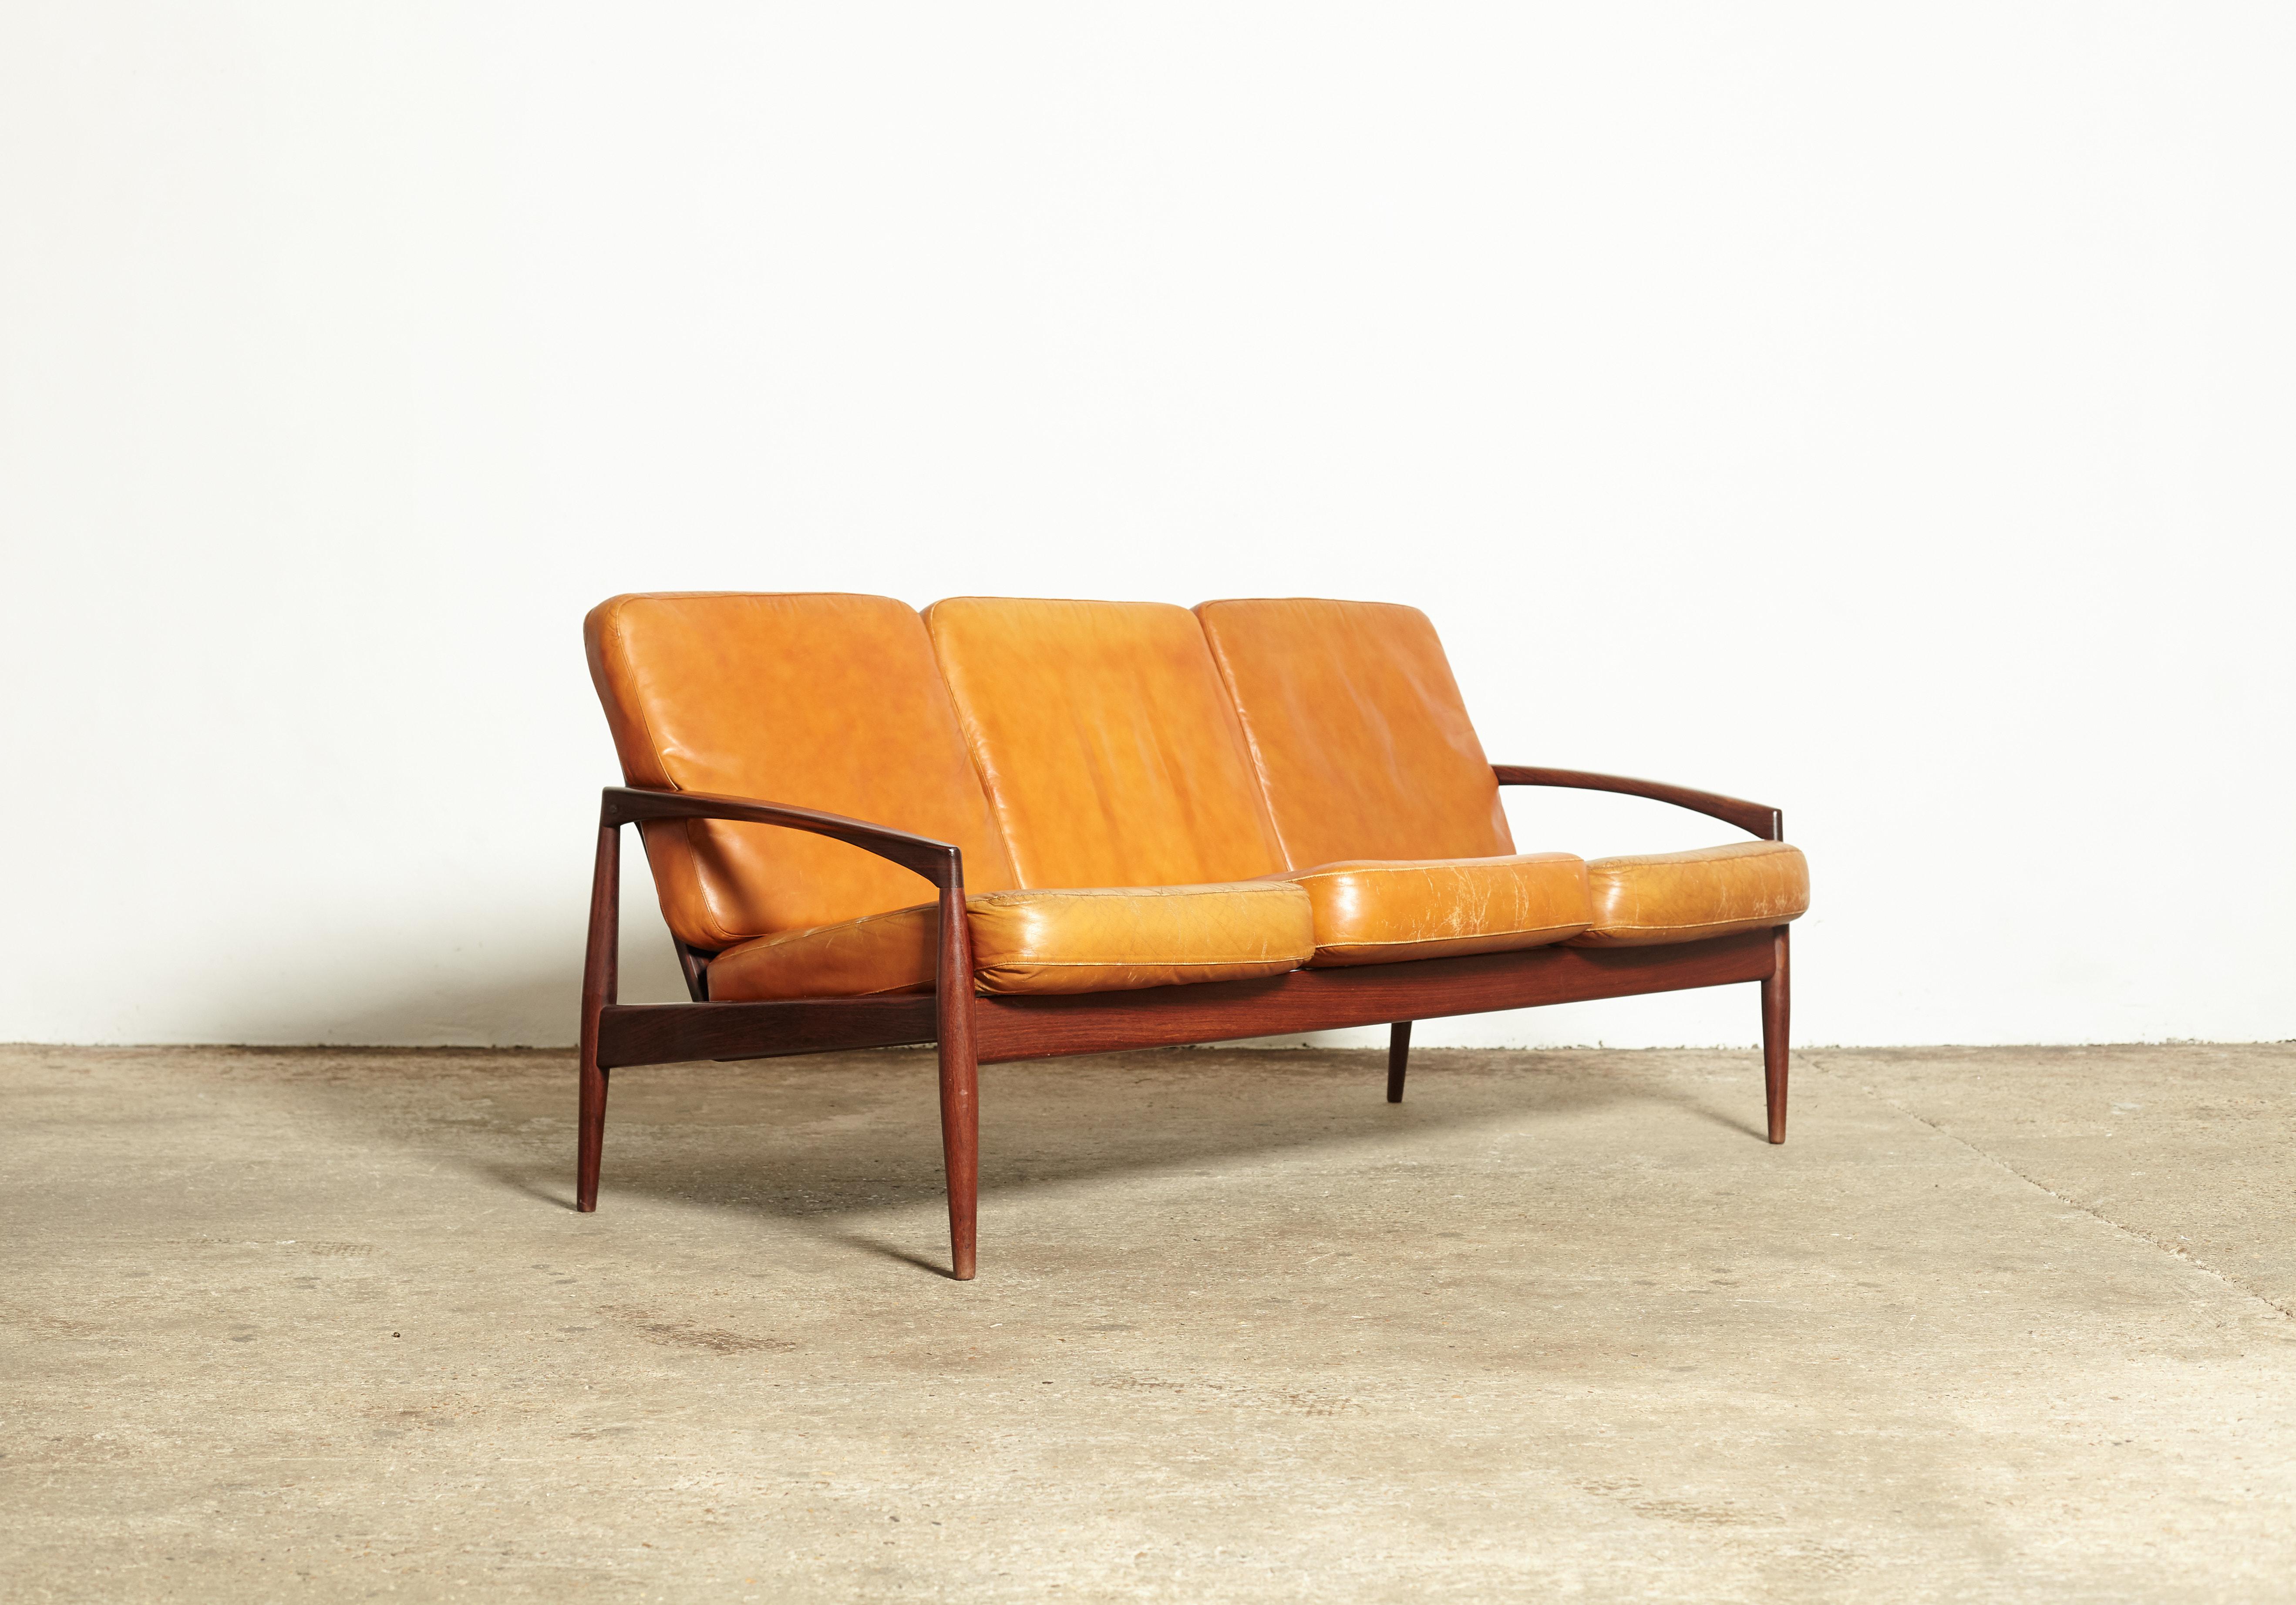 A superb rosewood Kai Kristiansen paper knife sofa, produced by Magnus Olesen, Denmark, 1960s. Rosewood frame in good condition and original patinated cognac leather cushions. Stamped with makers mark. The cushions show some wear but are loose so